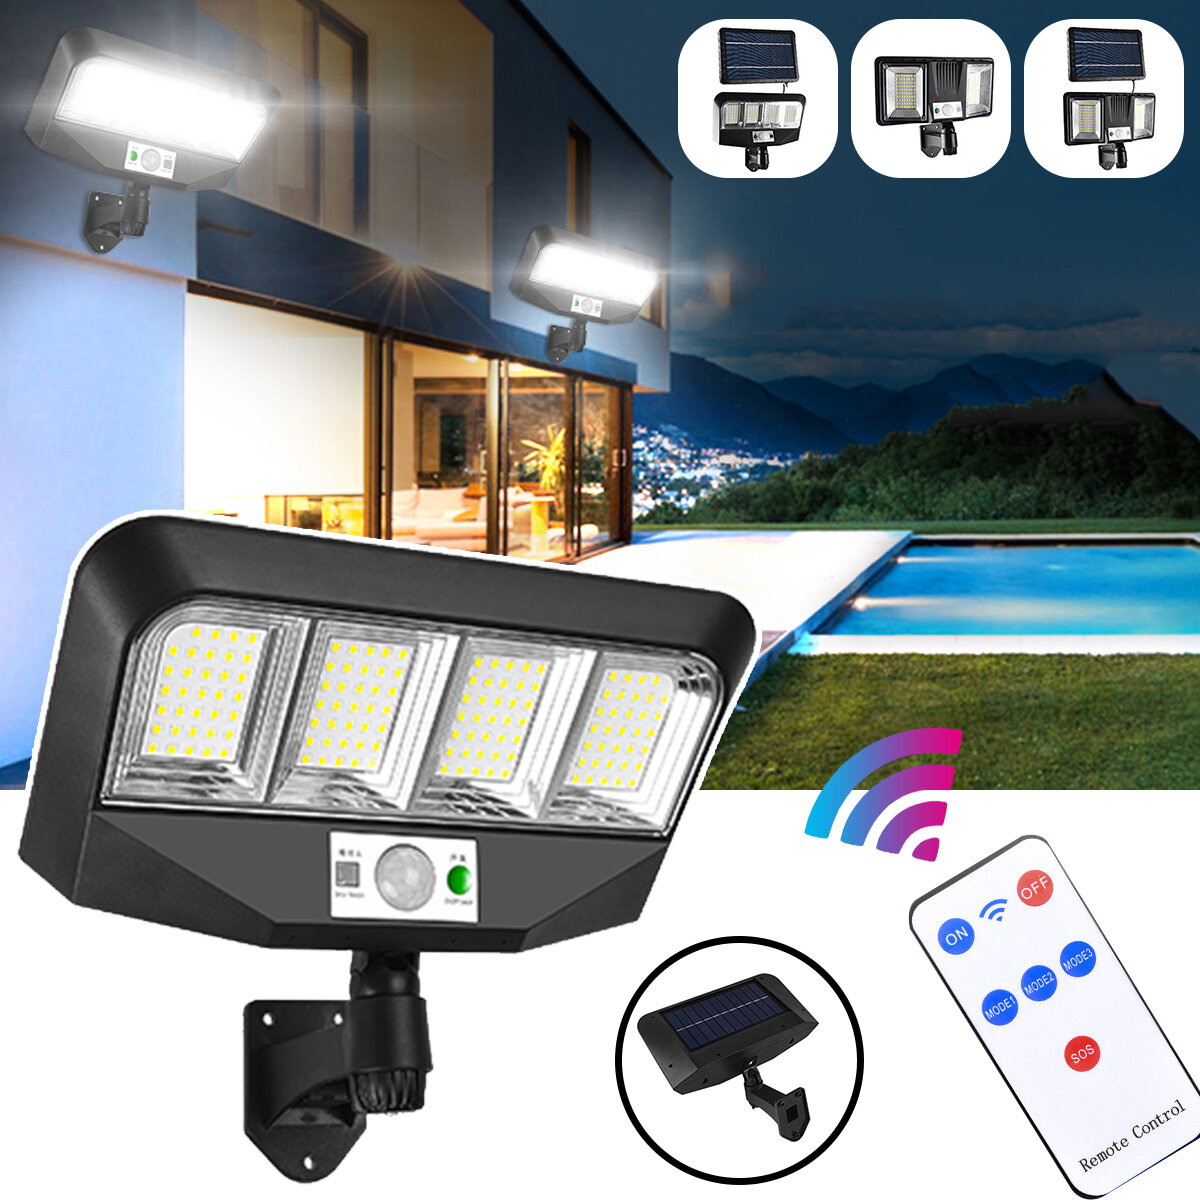 Solar Lights Split Induction Lights with Remote Control LED Wall Lights Super Bright Outdoor Camping